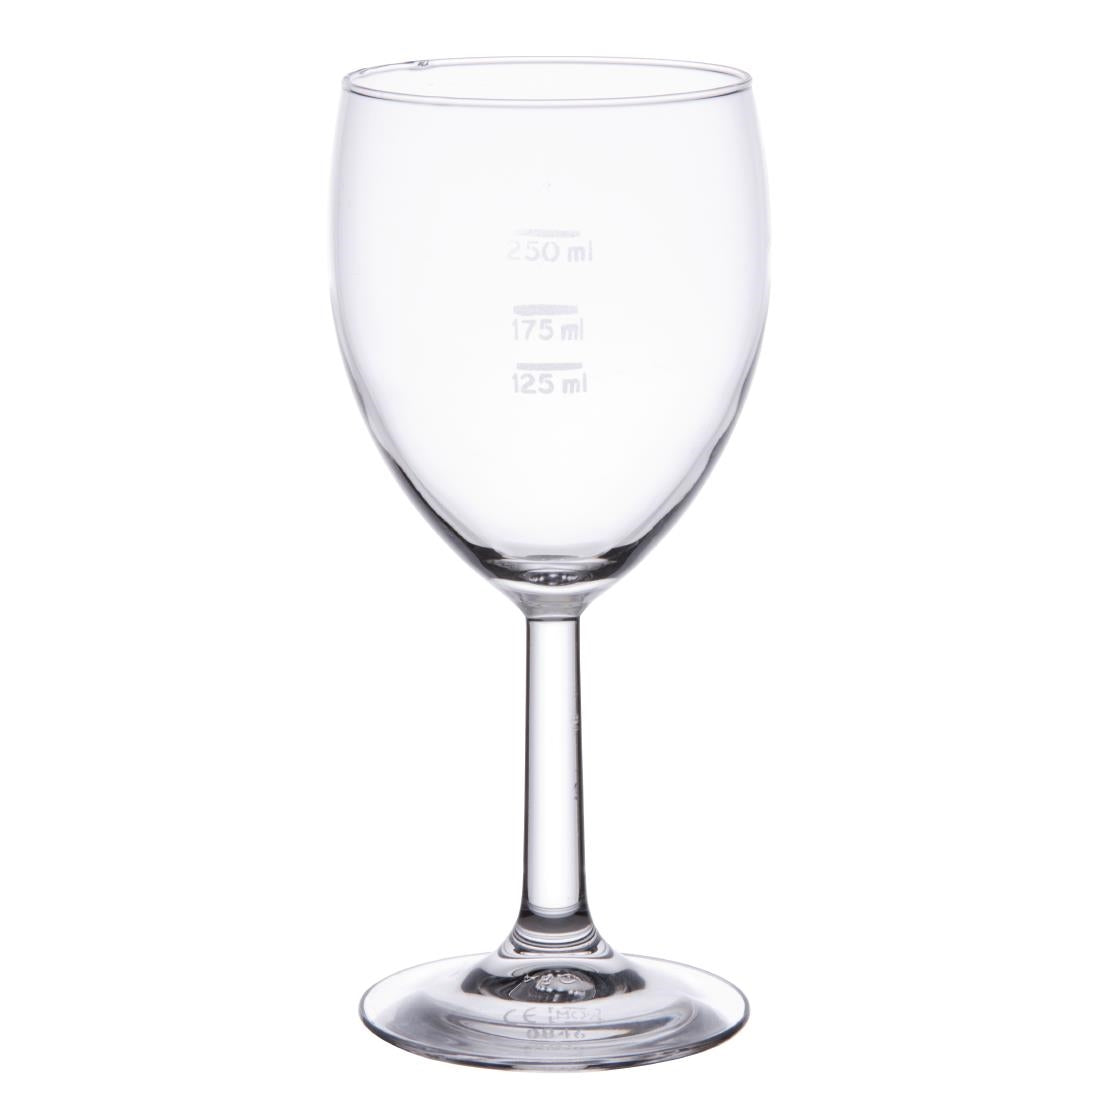 DK886 Arcoroc Savoie Grand Vin Wine Glasses 350ml CE Marked at 125ml 175ml and 250ml JD Catering Equipment Solutions Ltd